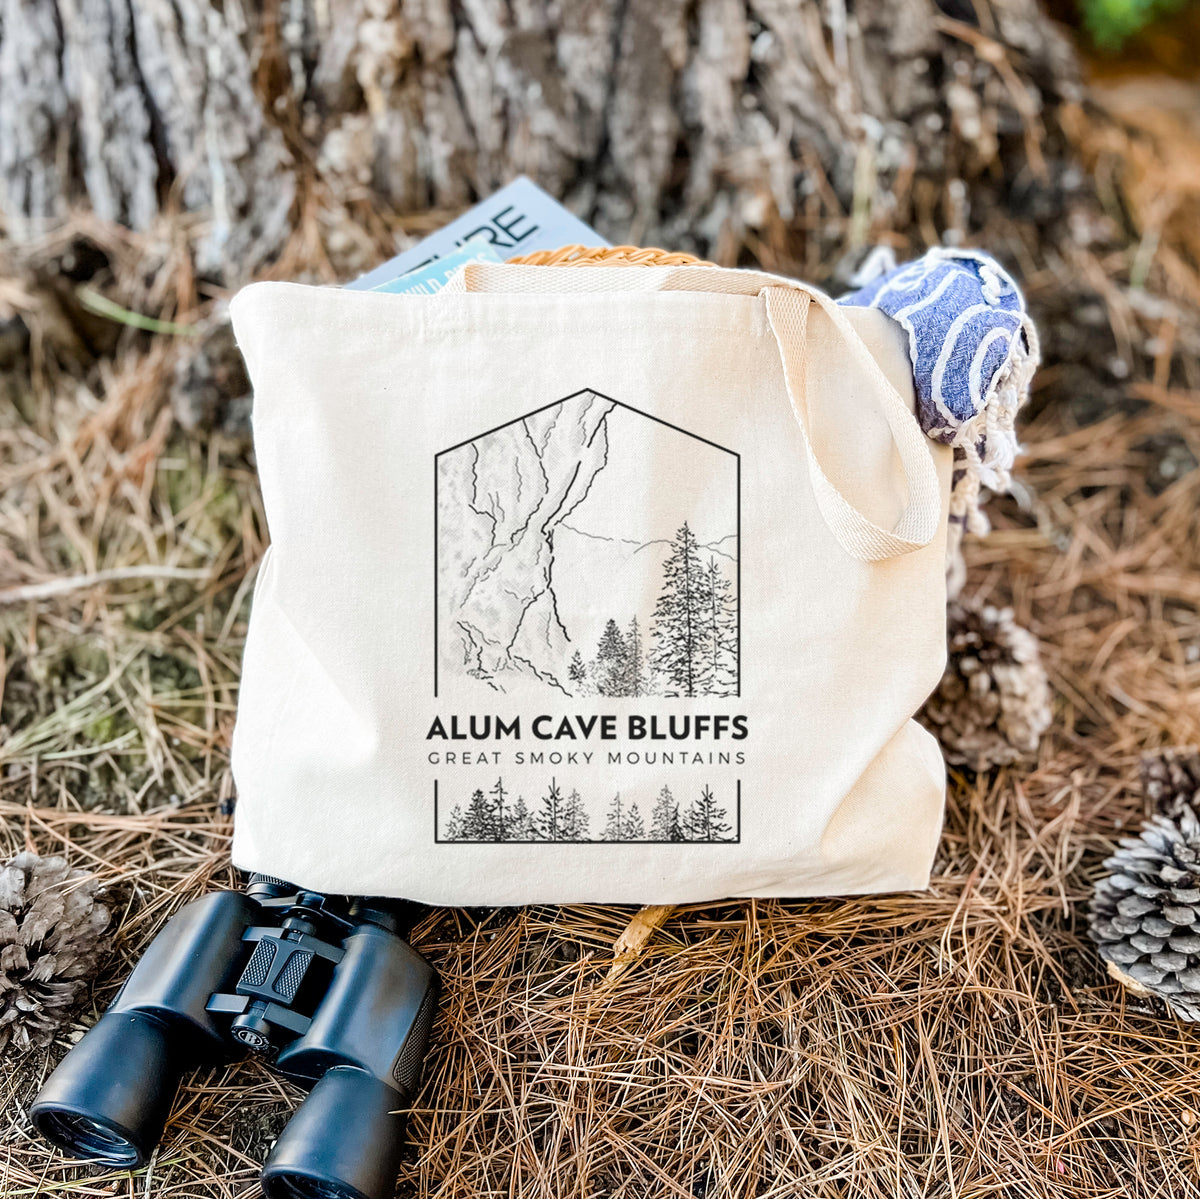 Alum Cave Bluffs - Great Smoky Mountains National Park - Tote Bag